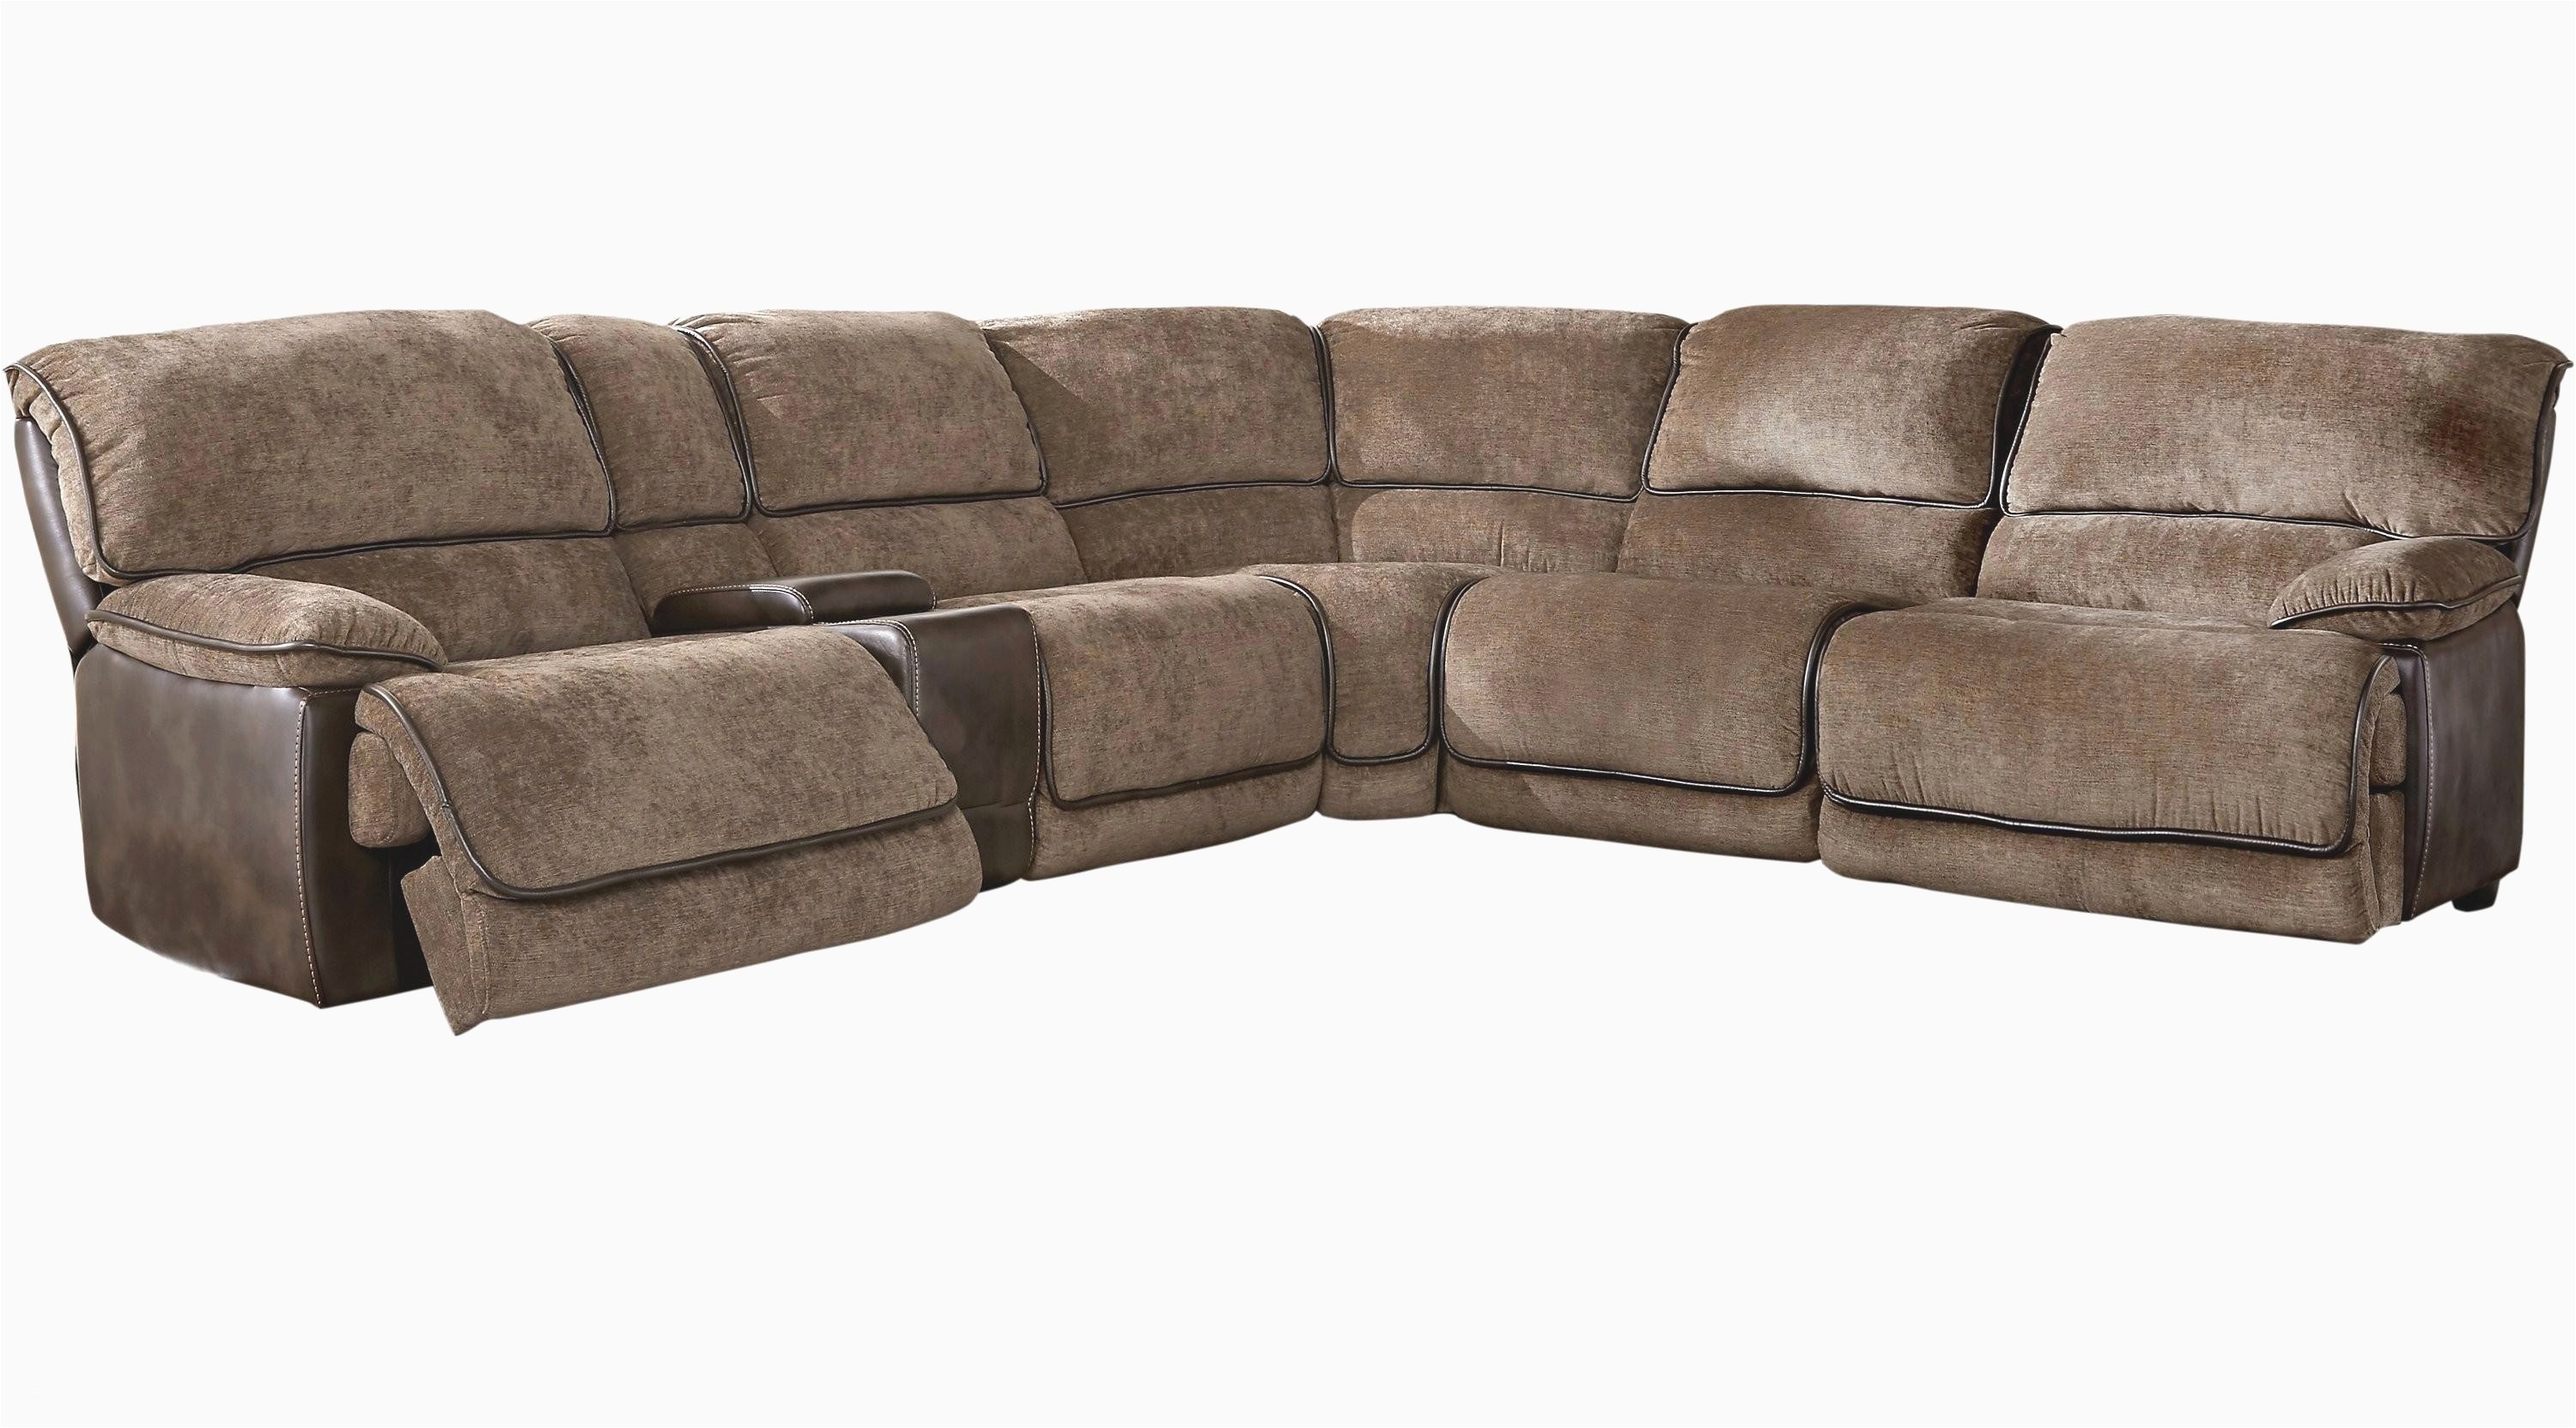 contemporary sectional sofas inspirational slipcover sectional sofa luxury couch cover new sectional couch 0d